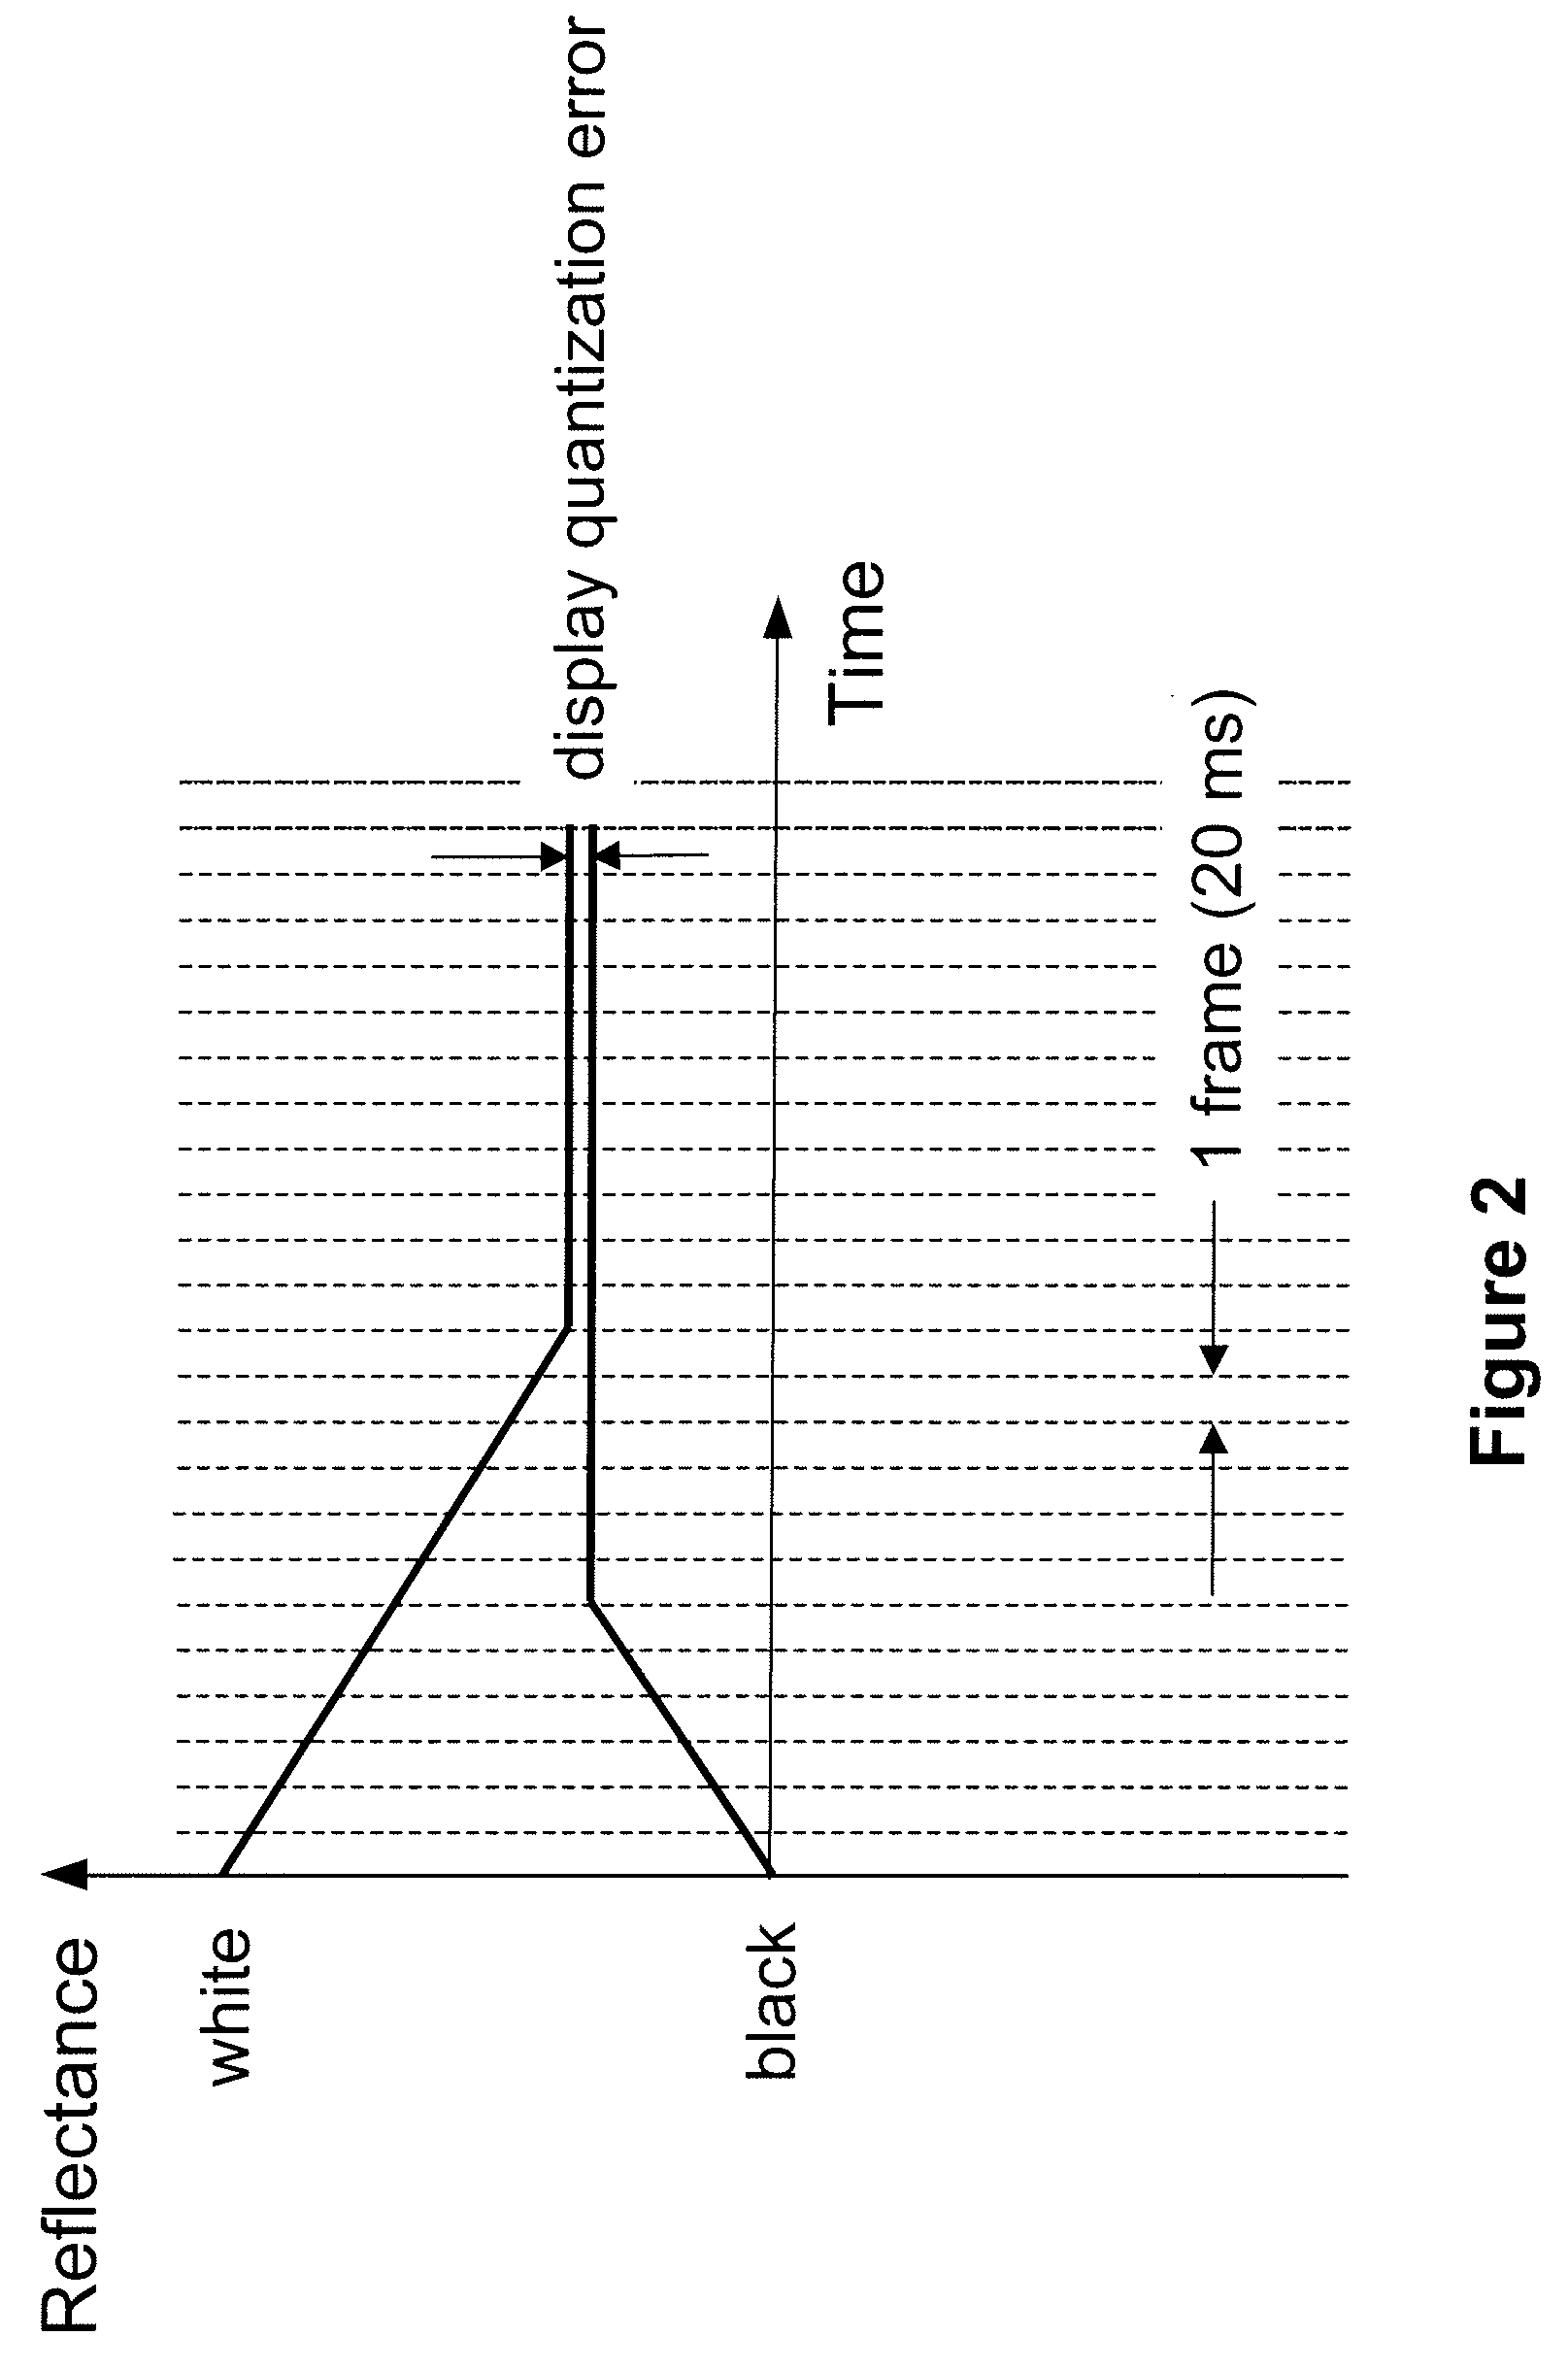 Method for reducing image artifacts on electronic paper displays